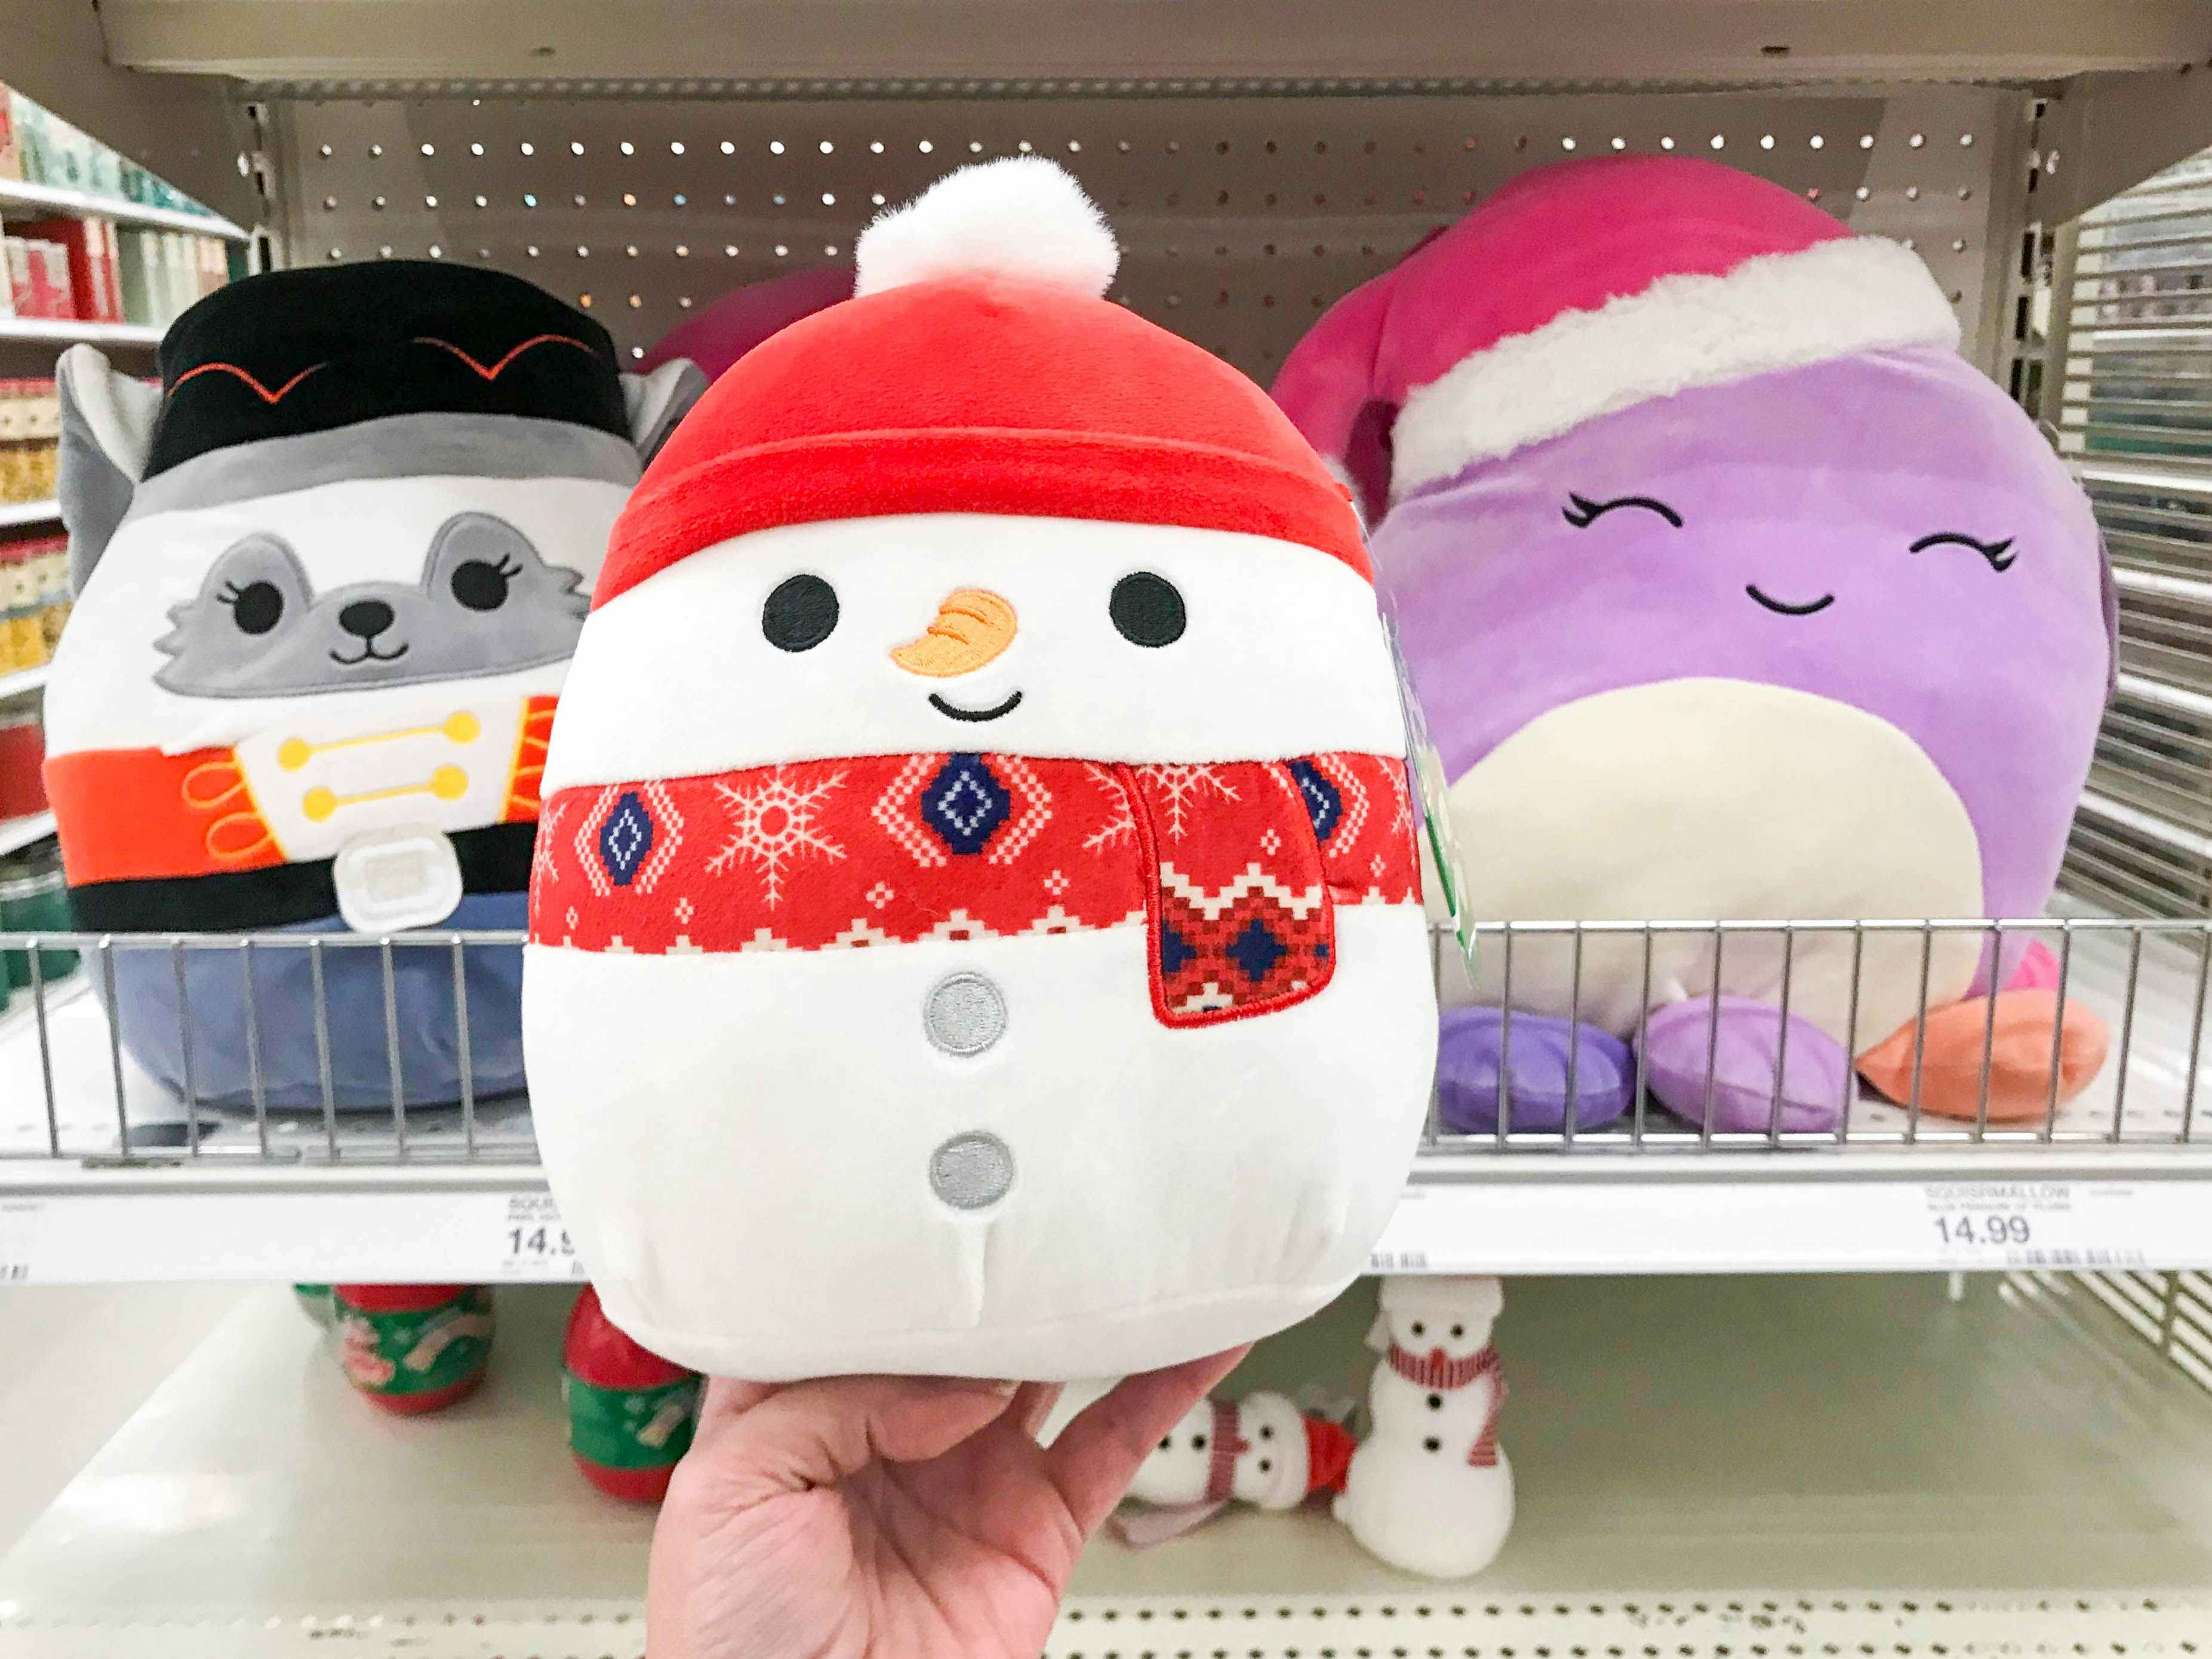 https://prod-cdn-thekrazycouponlady.imgix.net/wp-content/uploads/2022/10/squishmallows-holiday-christmas-2023-kcl-1-1699048922-1699048922.jpg?auto=format&fit=fill&q=25